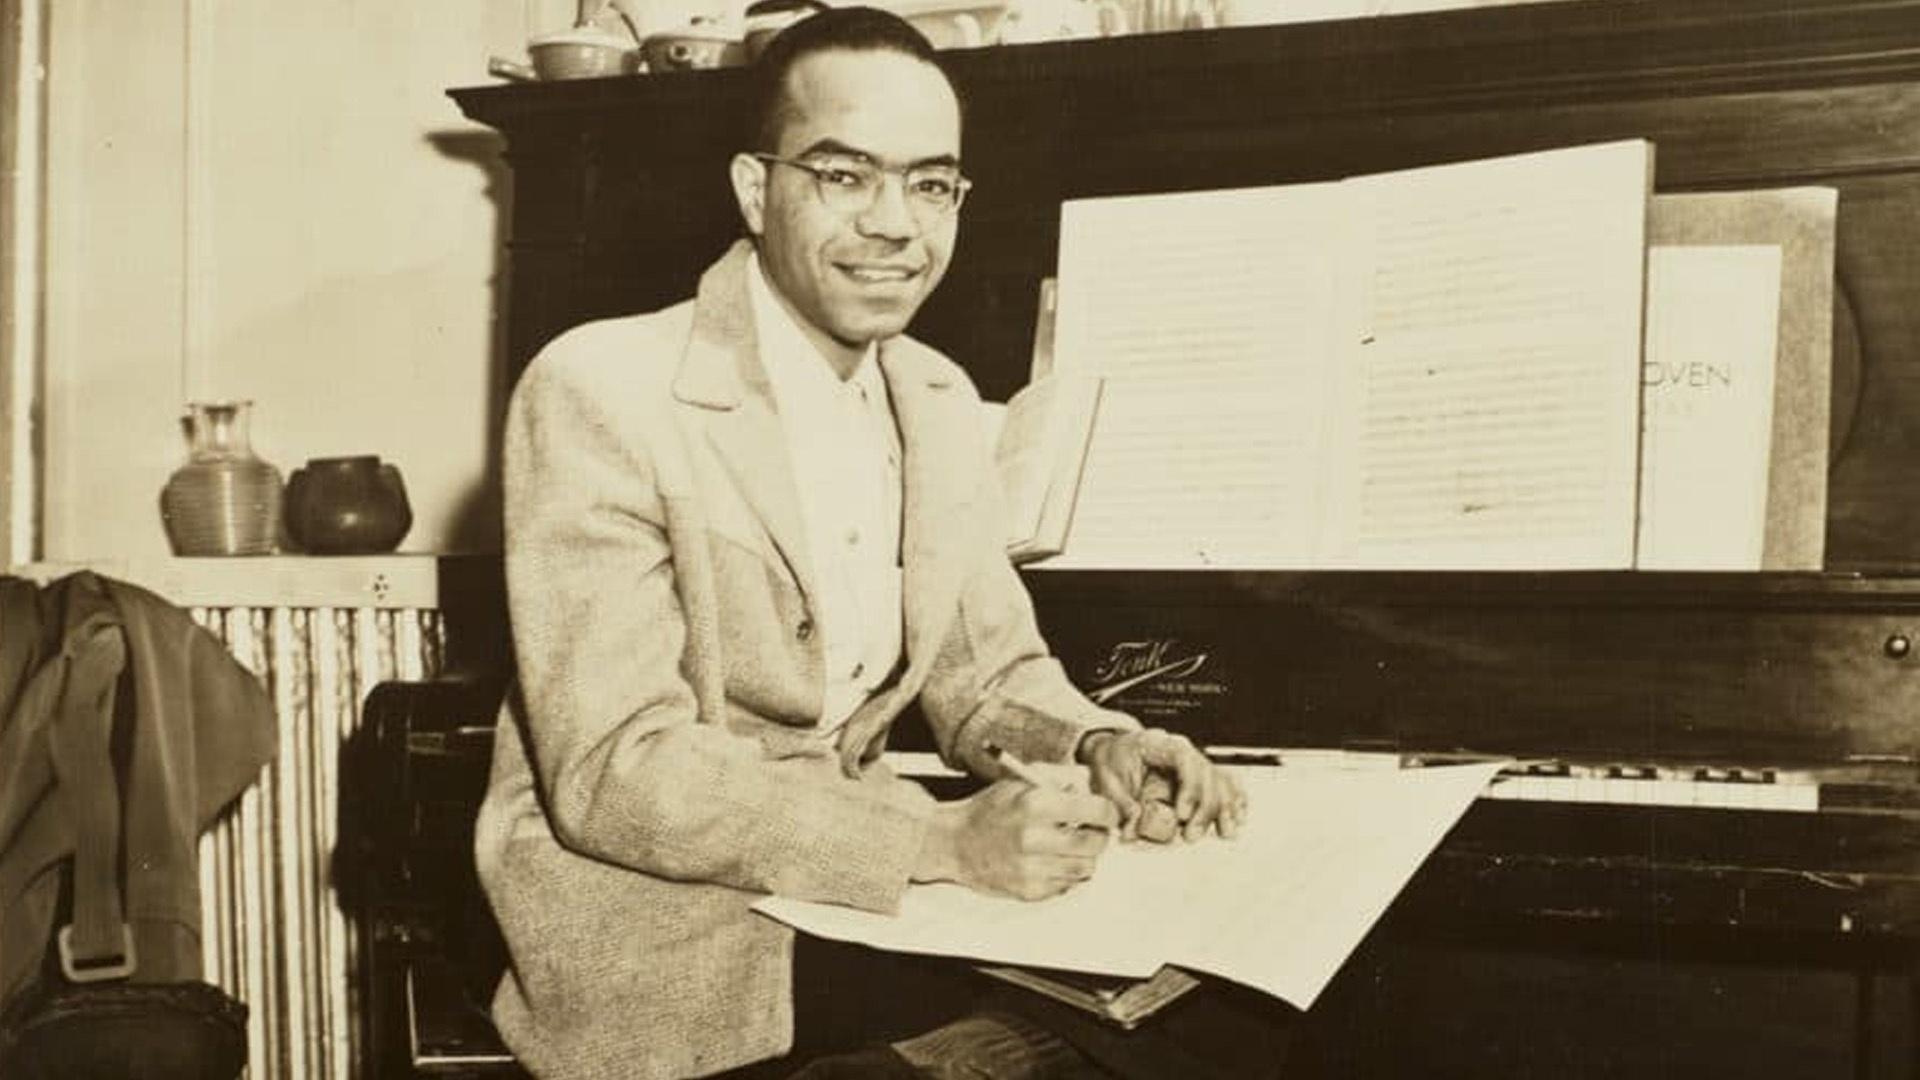 Composer Ulysses Kay sitting in front of a piano and holding a pen and paper in an undated photo.